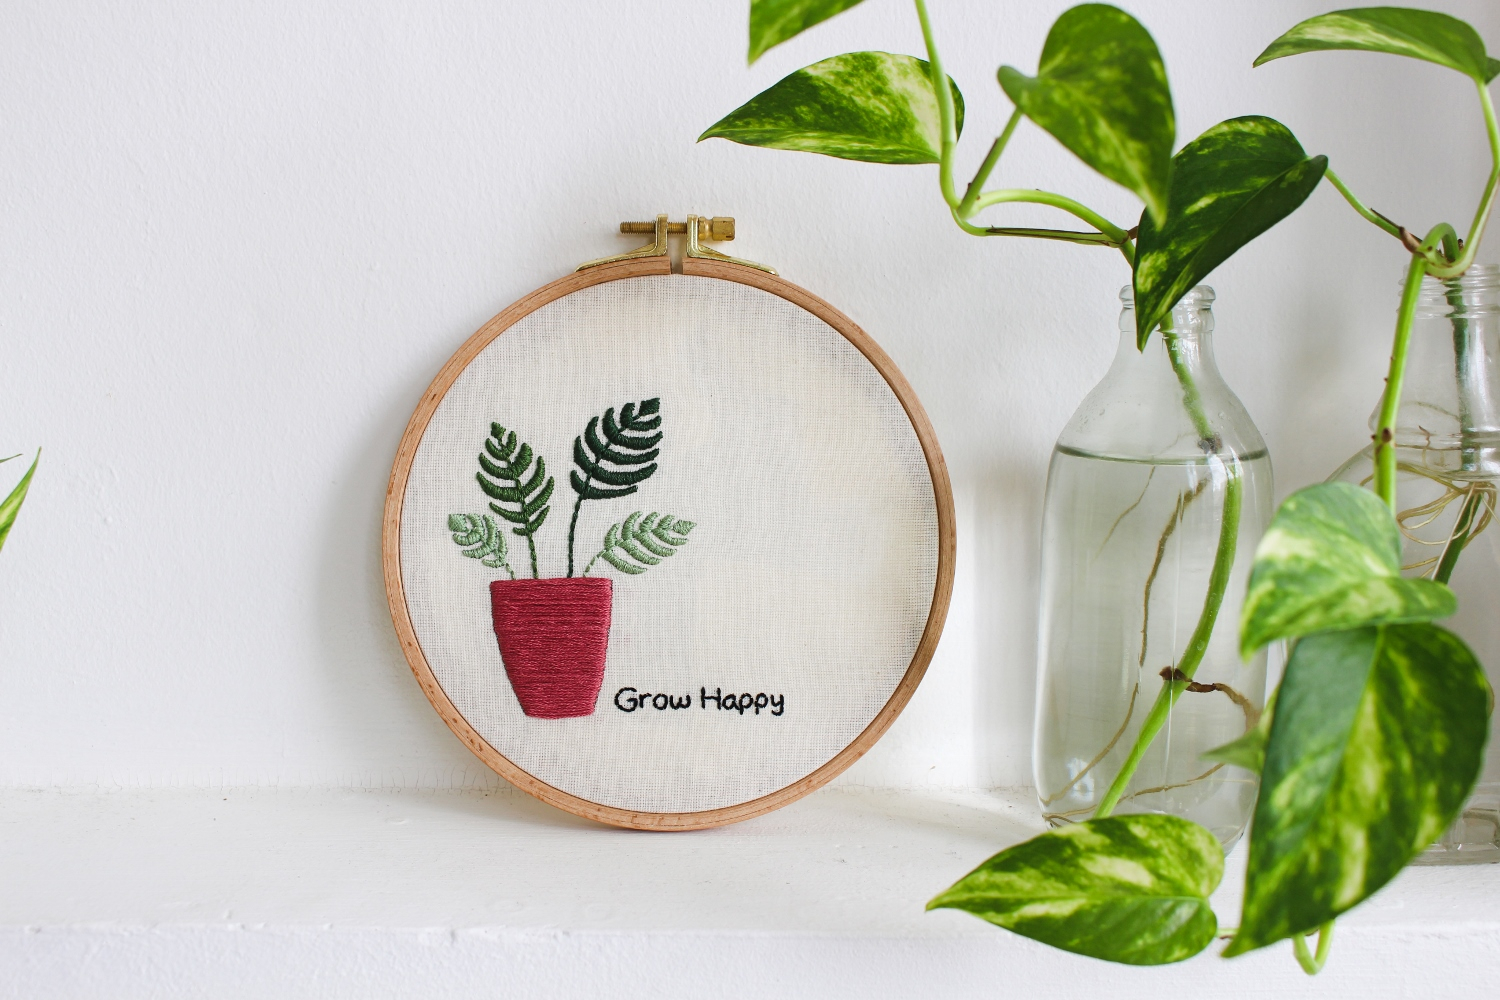 Free Paper Embroidery Patterns And Instructions Tata Sol Bluprint Collab Free Pattern